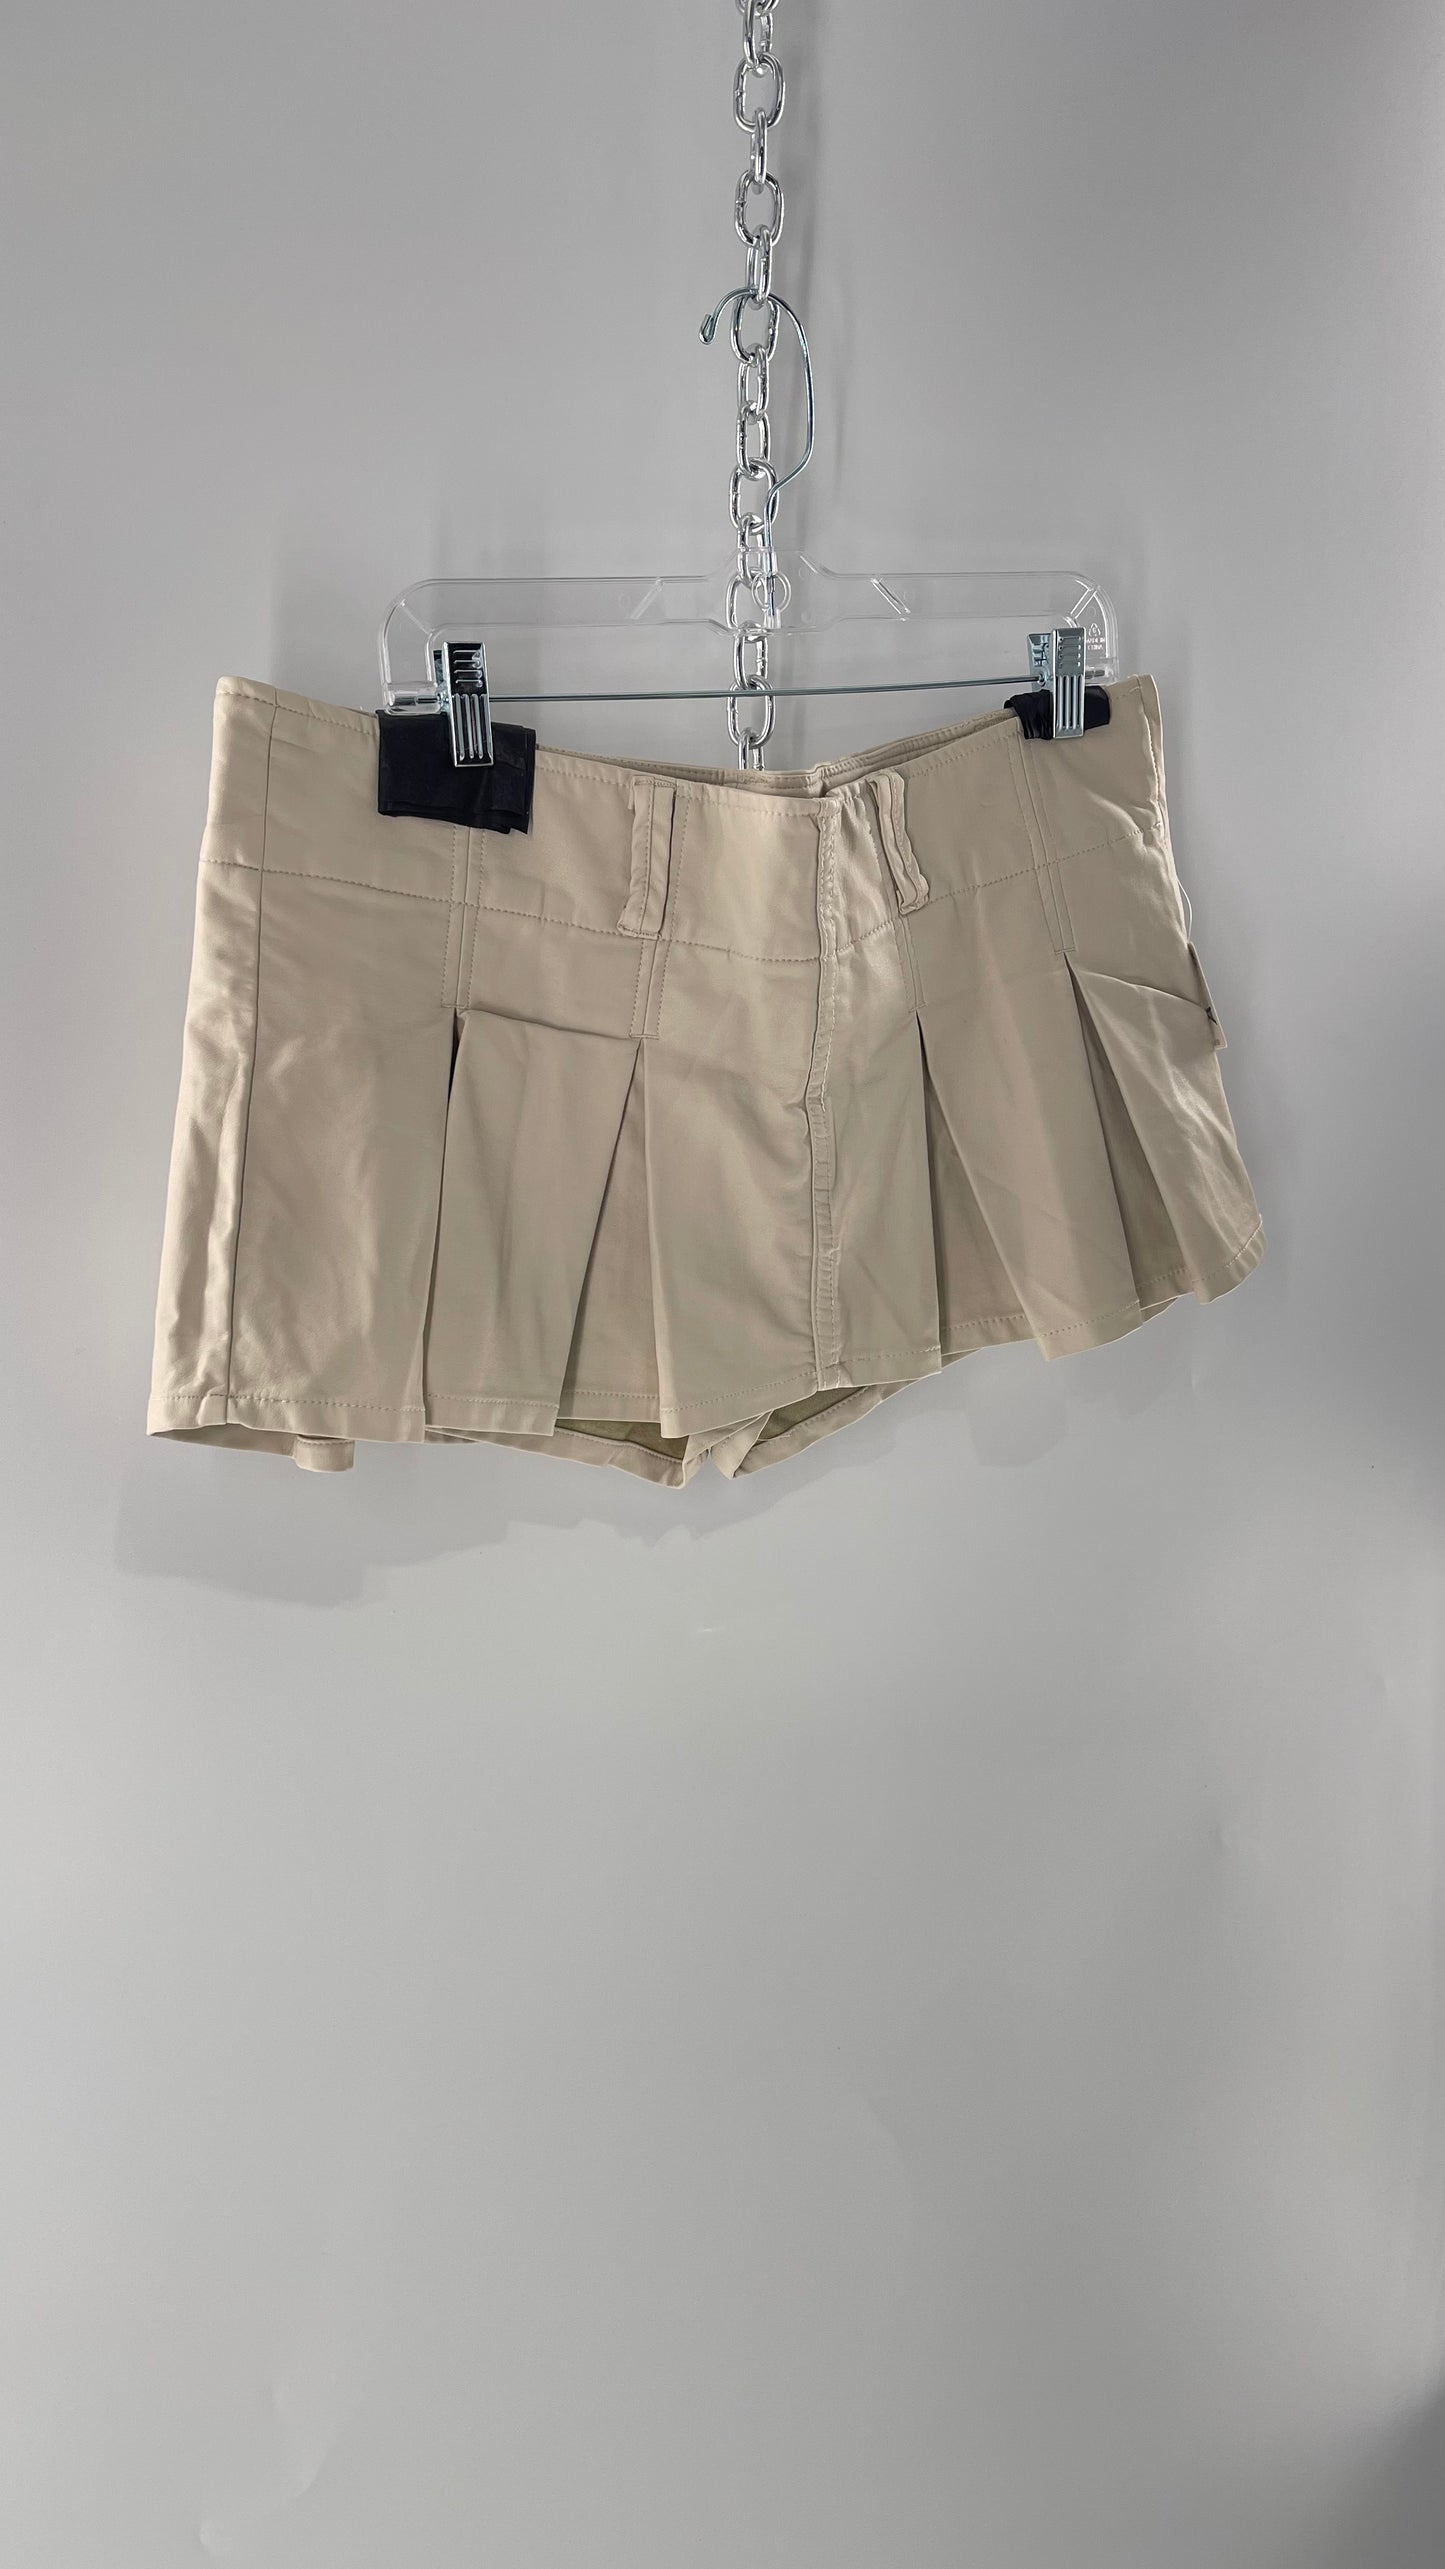 Free People Off White Pleated Vegan Leather Ultra Micro Mini Skirt with Hidden Built in Shorts (12)